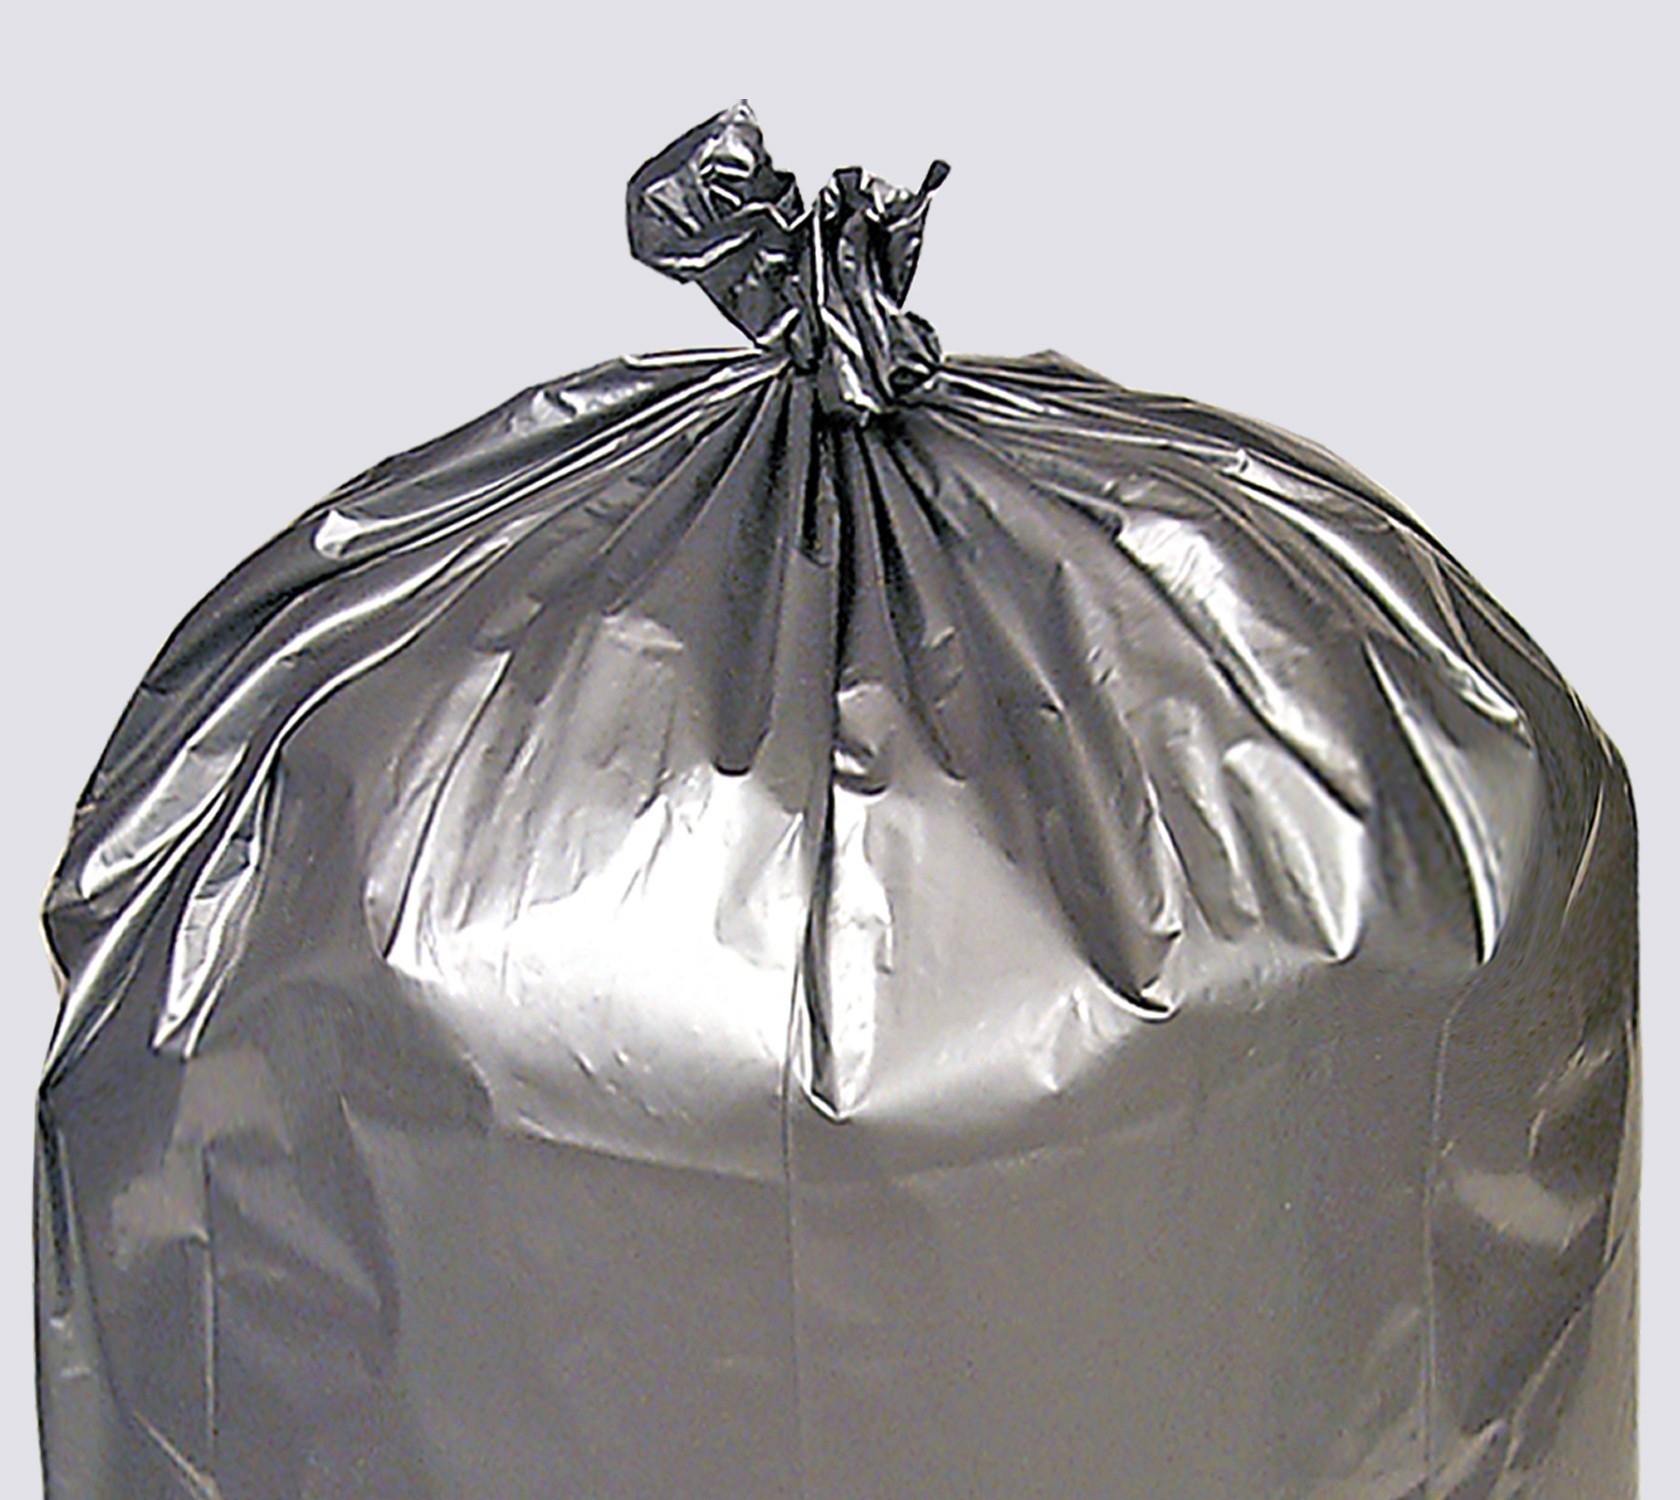 Pitt Plastics Can Liners / Garbage Bags